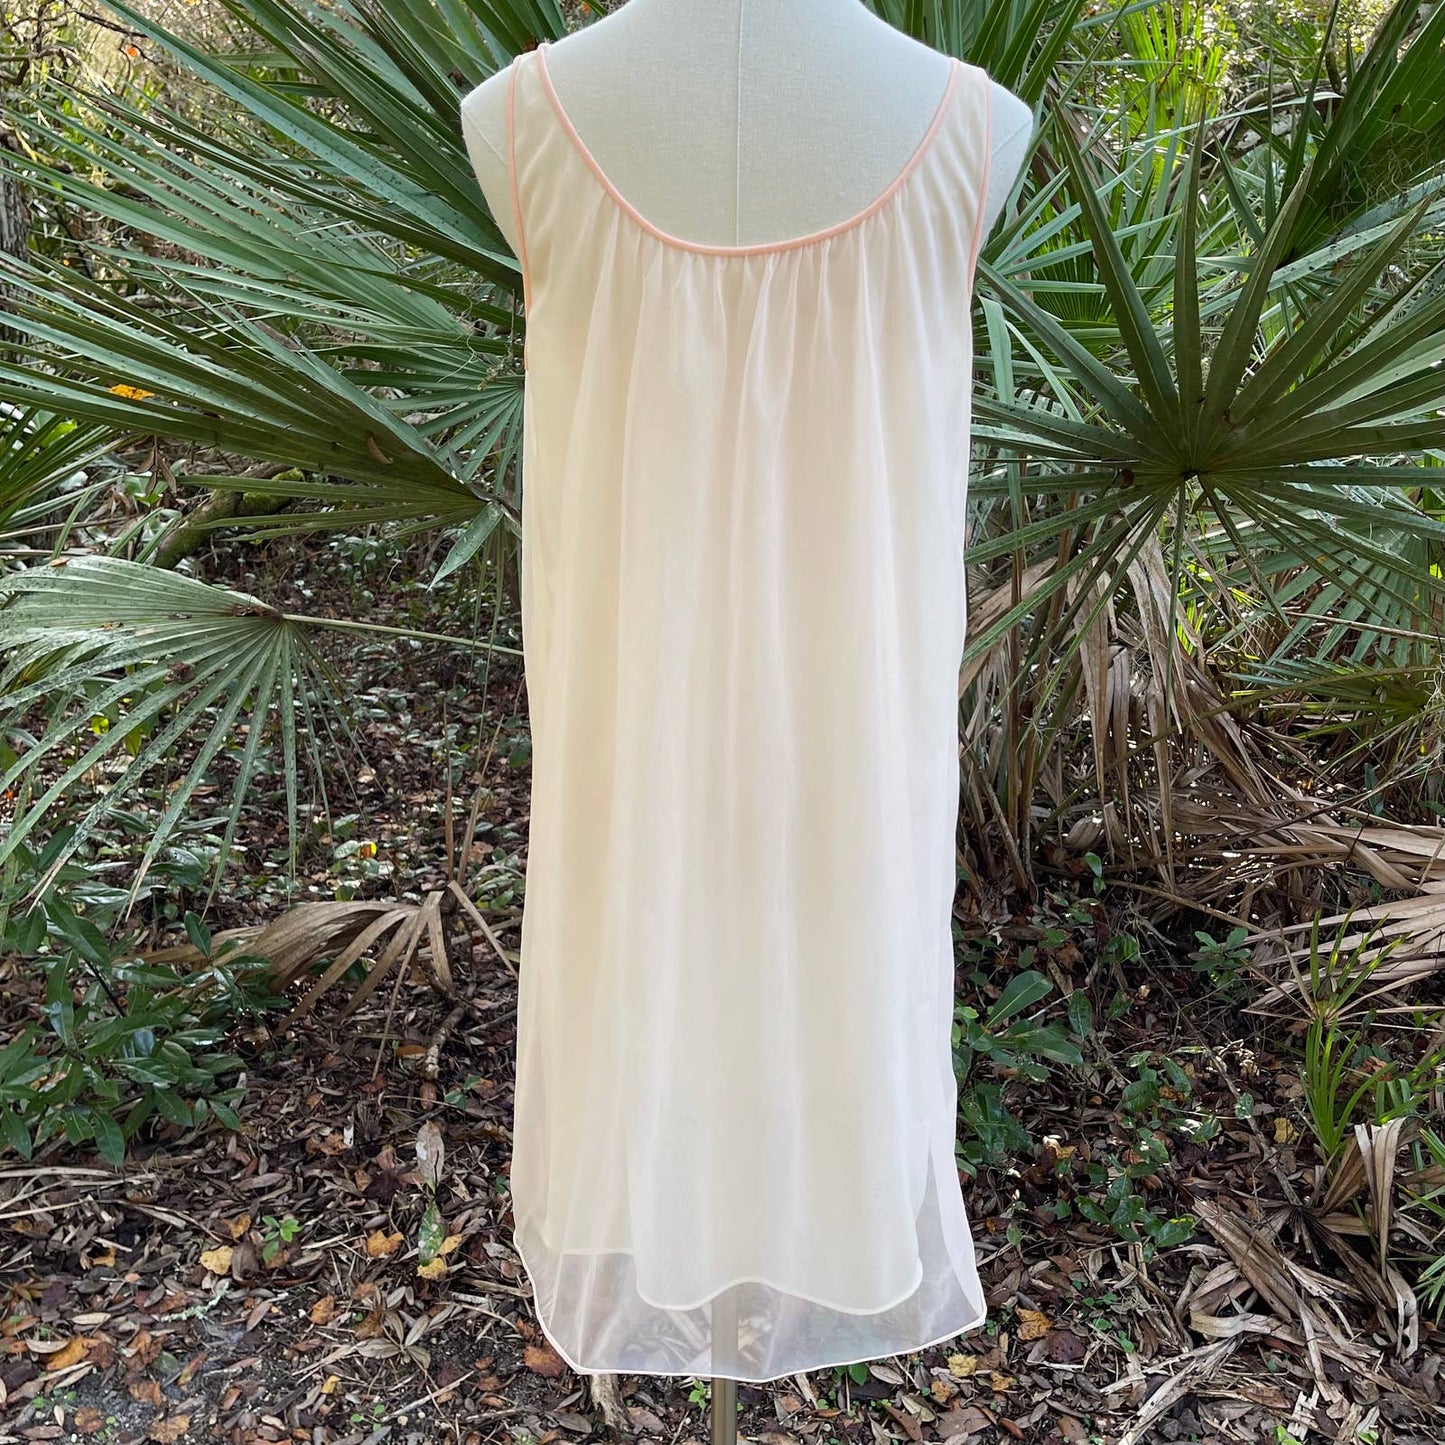 Vintage 60s Peach Knee Length Nightgown Lace Applique Lingerie Kayser Size Small